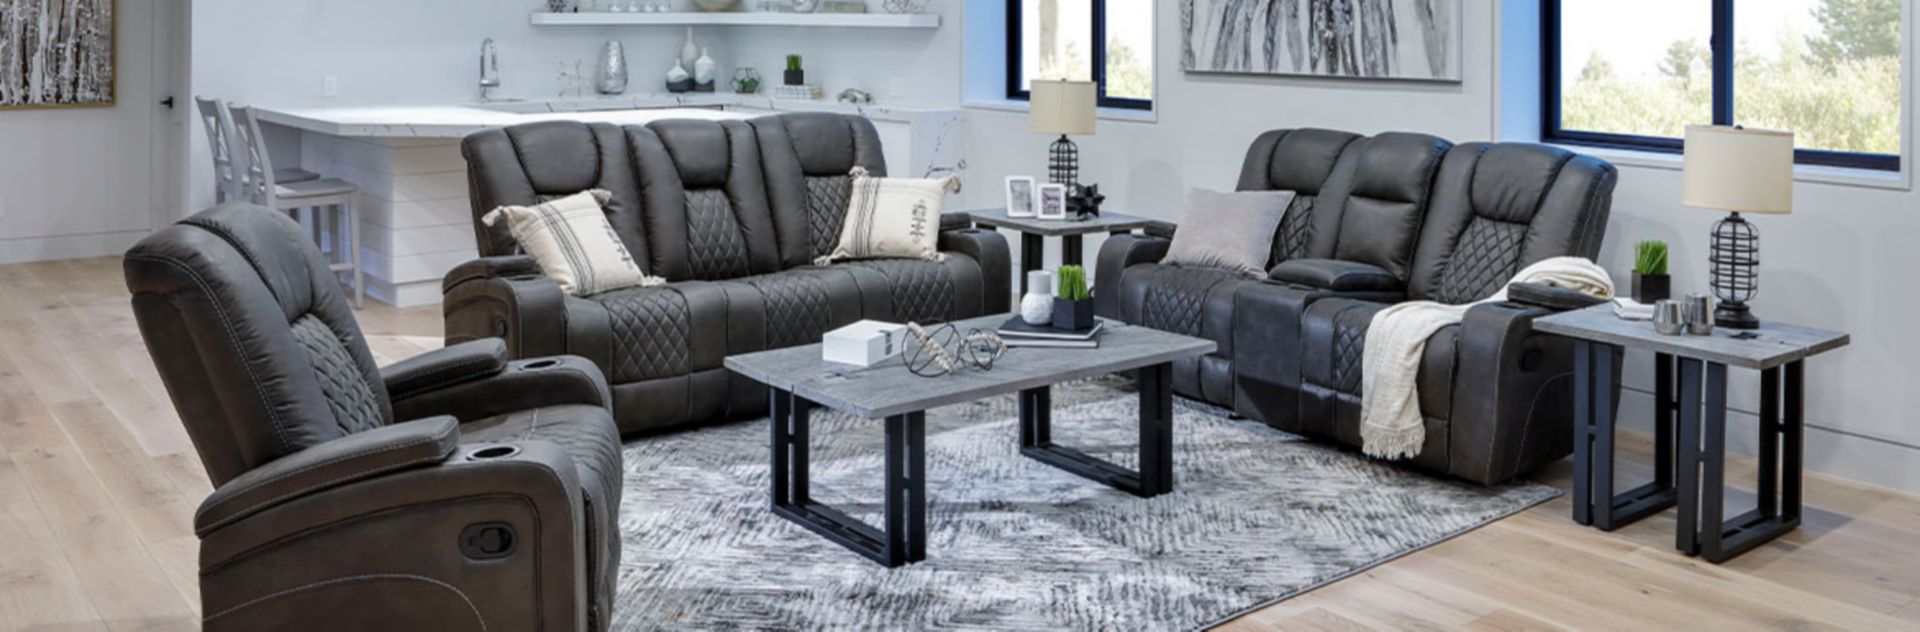 Browse Sofas and Seating